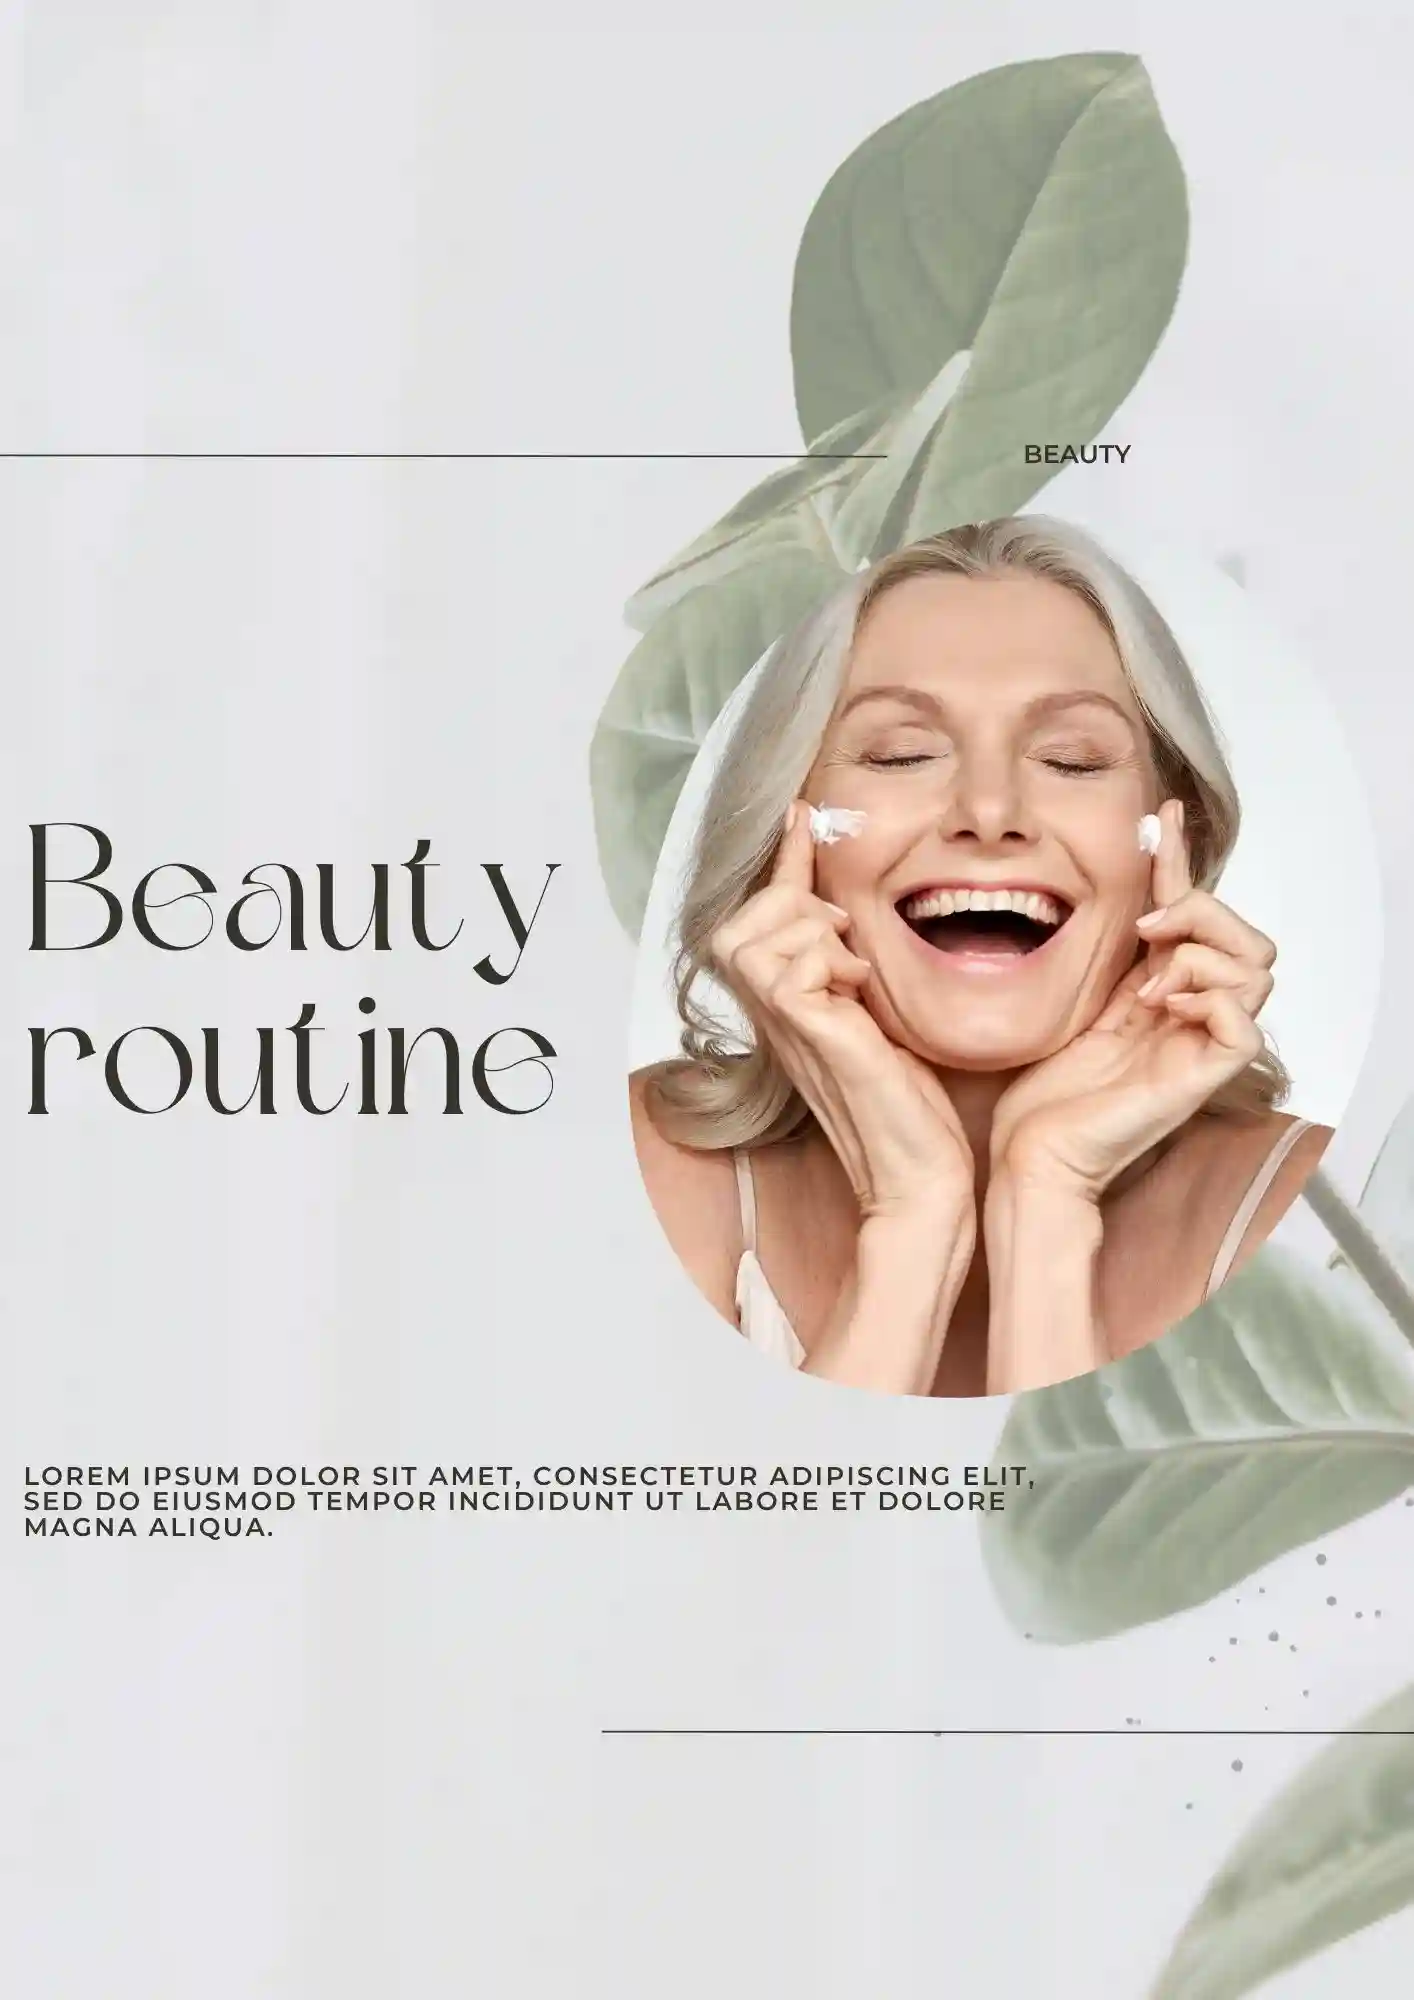 Beauty Routine Template